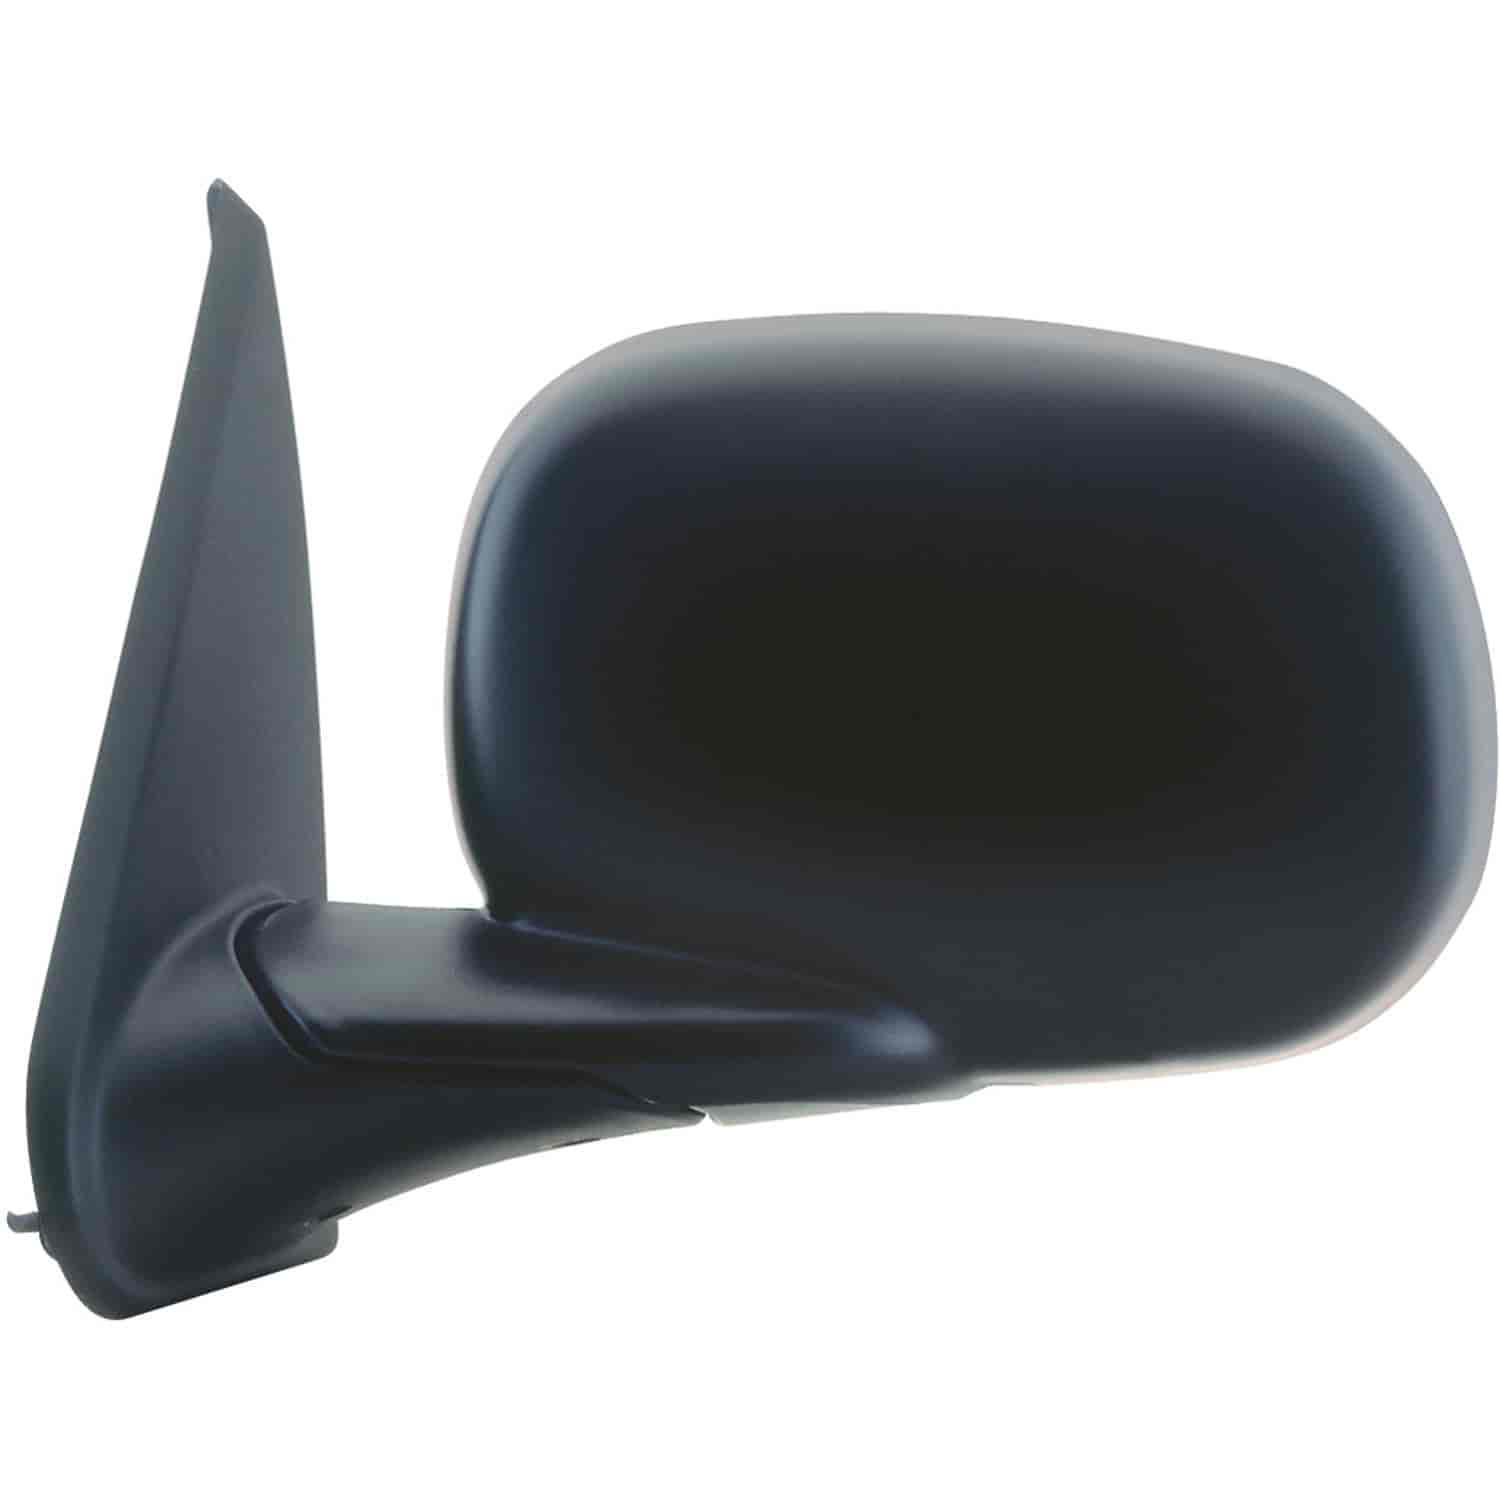 OEM Style Replacement mirror for 98-00 Dodge Full Size Van driver side mirror tested to fit and func